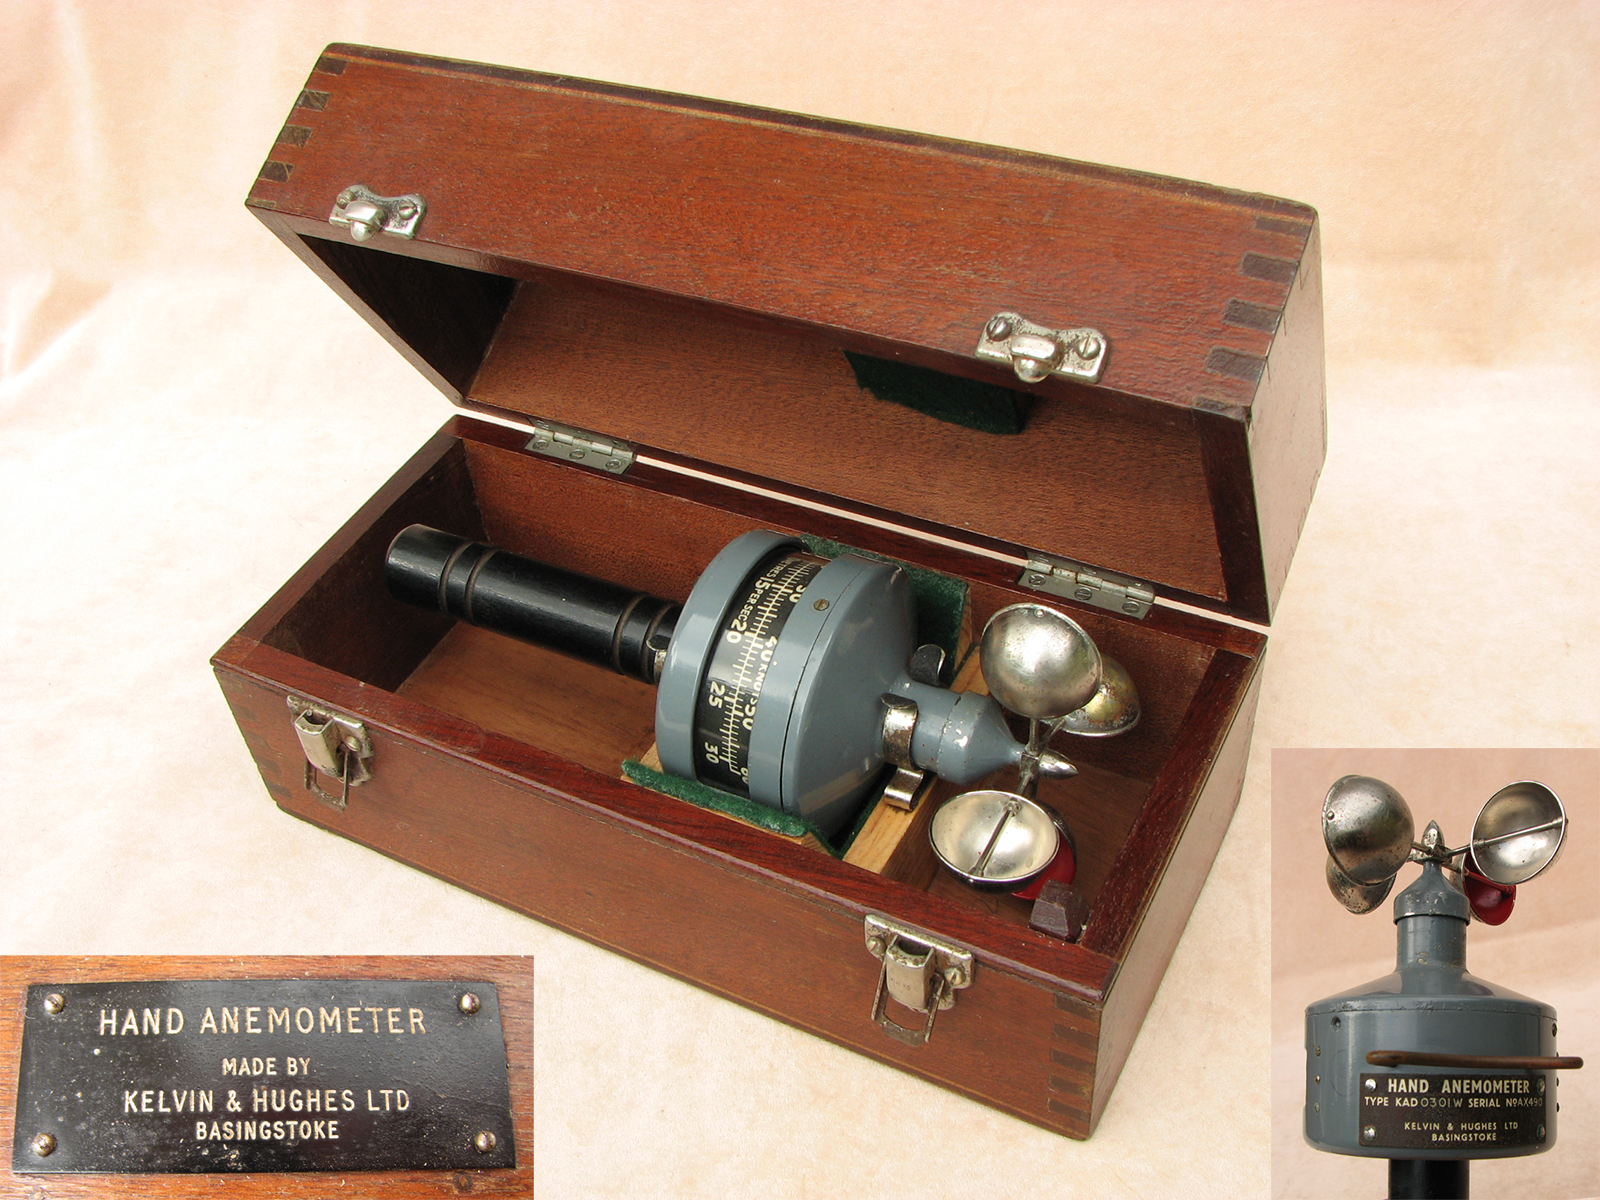 1950's Kelvin & Hughes hand anemometer with case